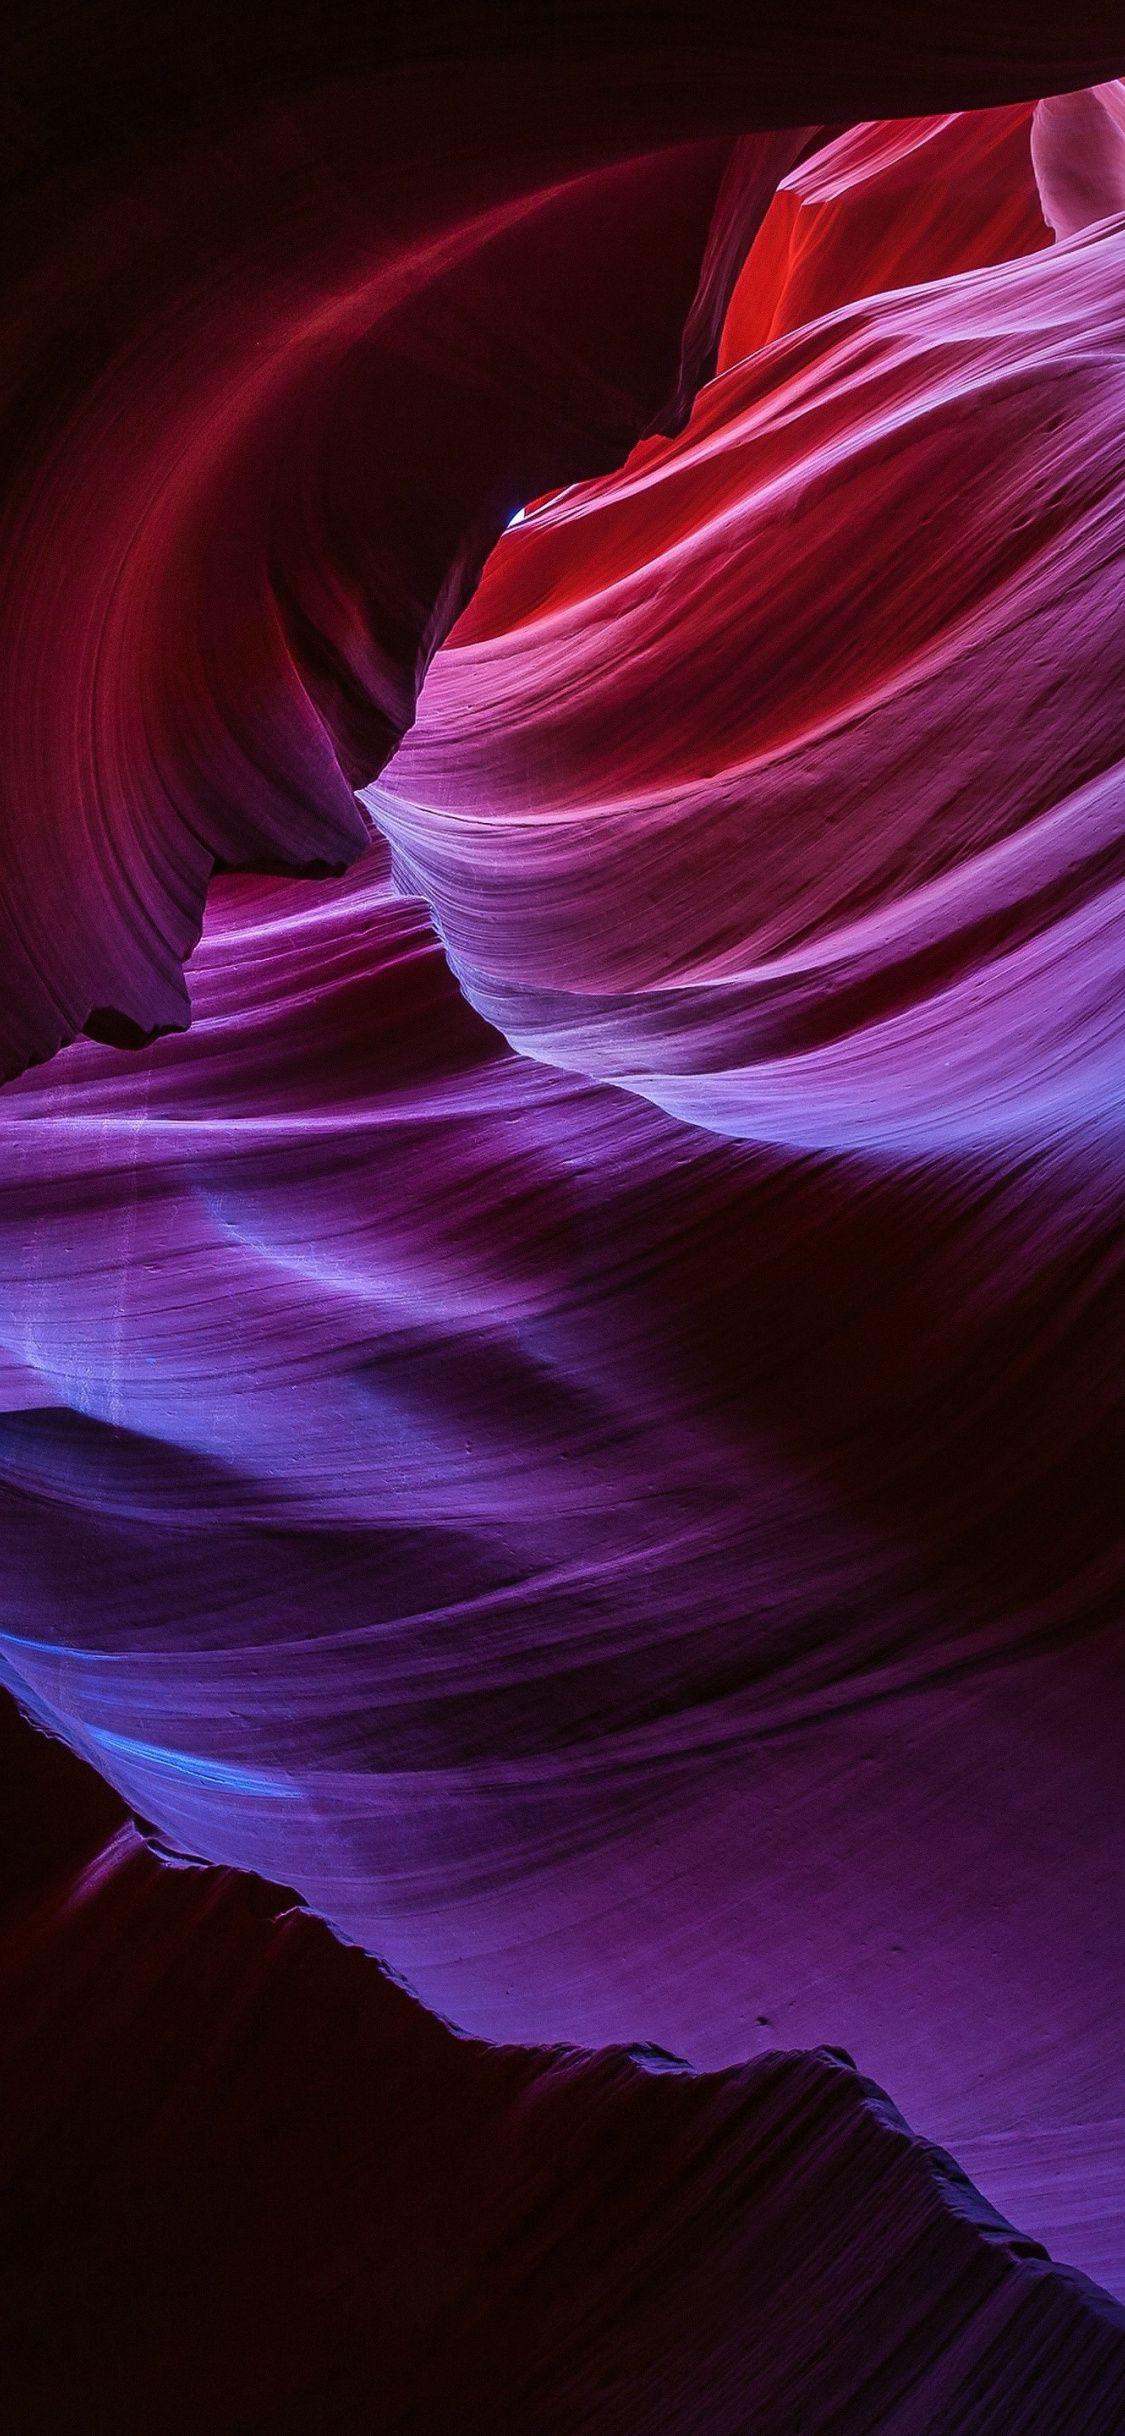 Canyon iPhone Wallpapers - Top Free Canyon iPhone Backgrounds ...